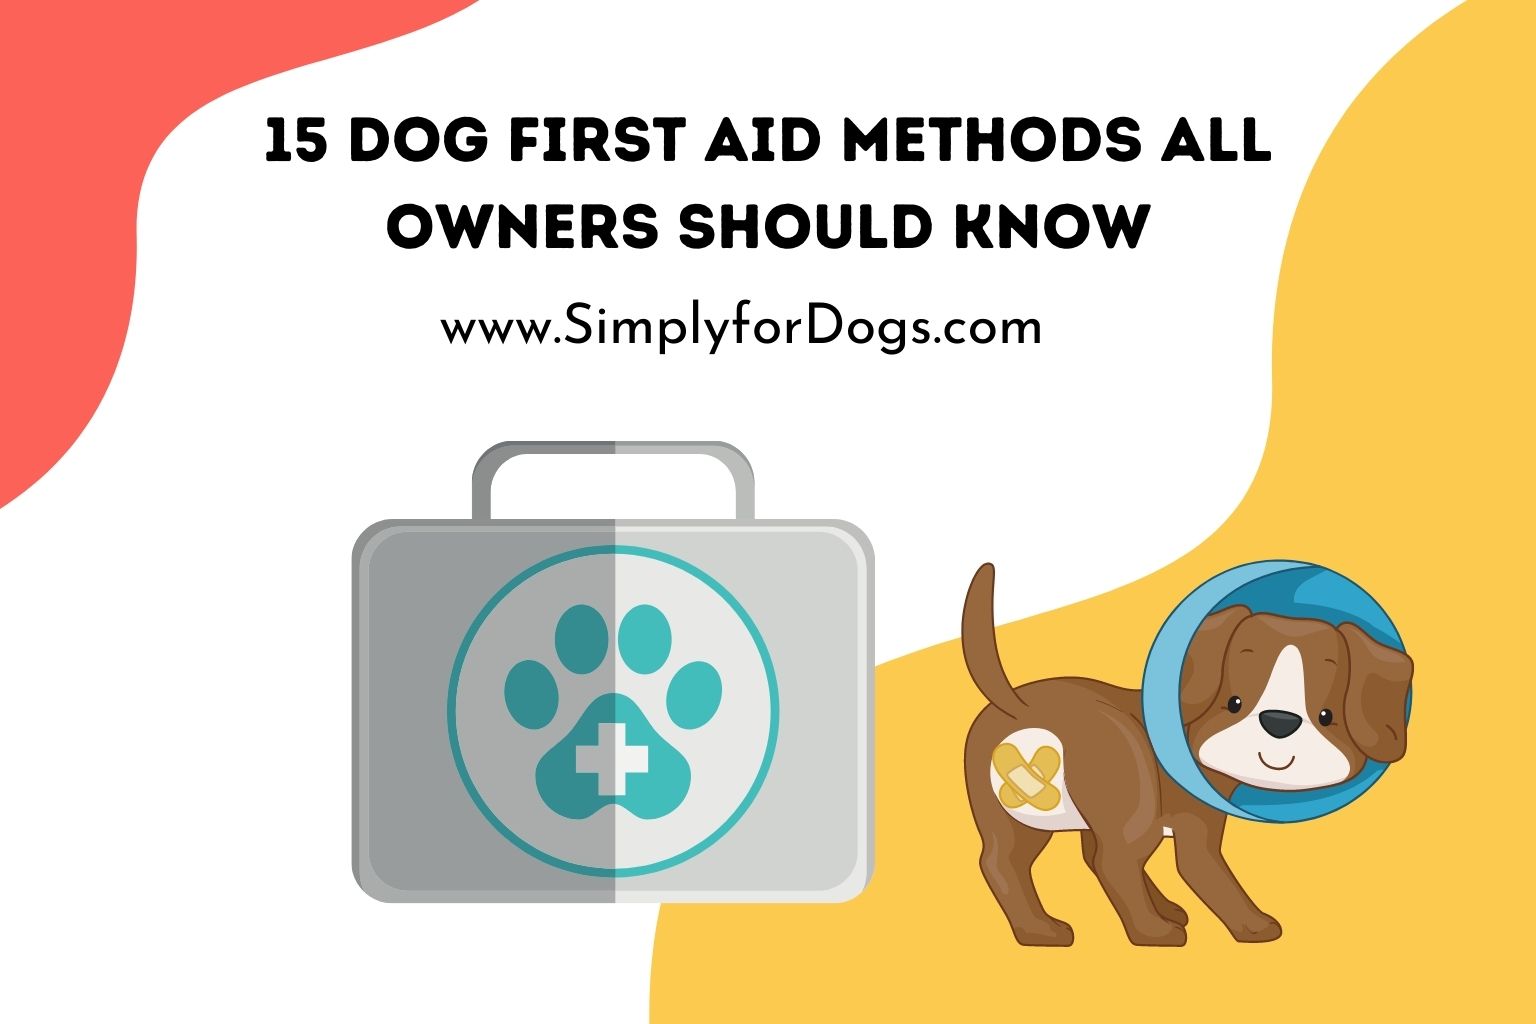 15 Dog First Aid Methods All Owners Should Know